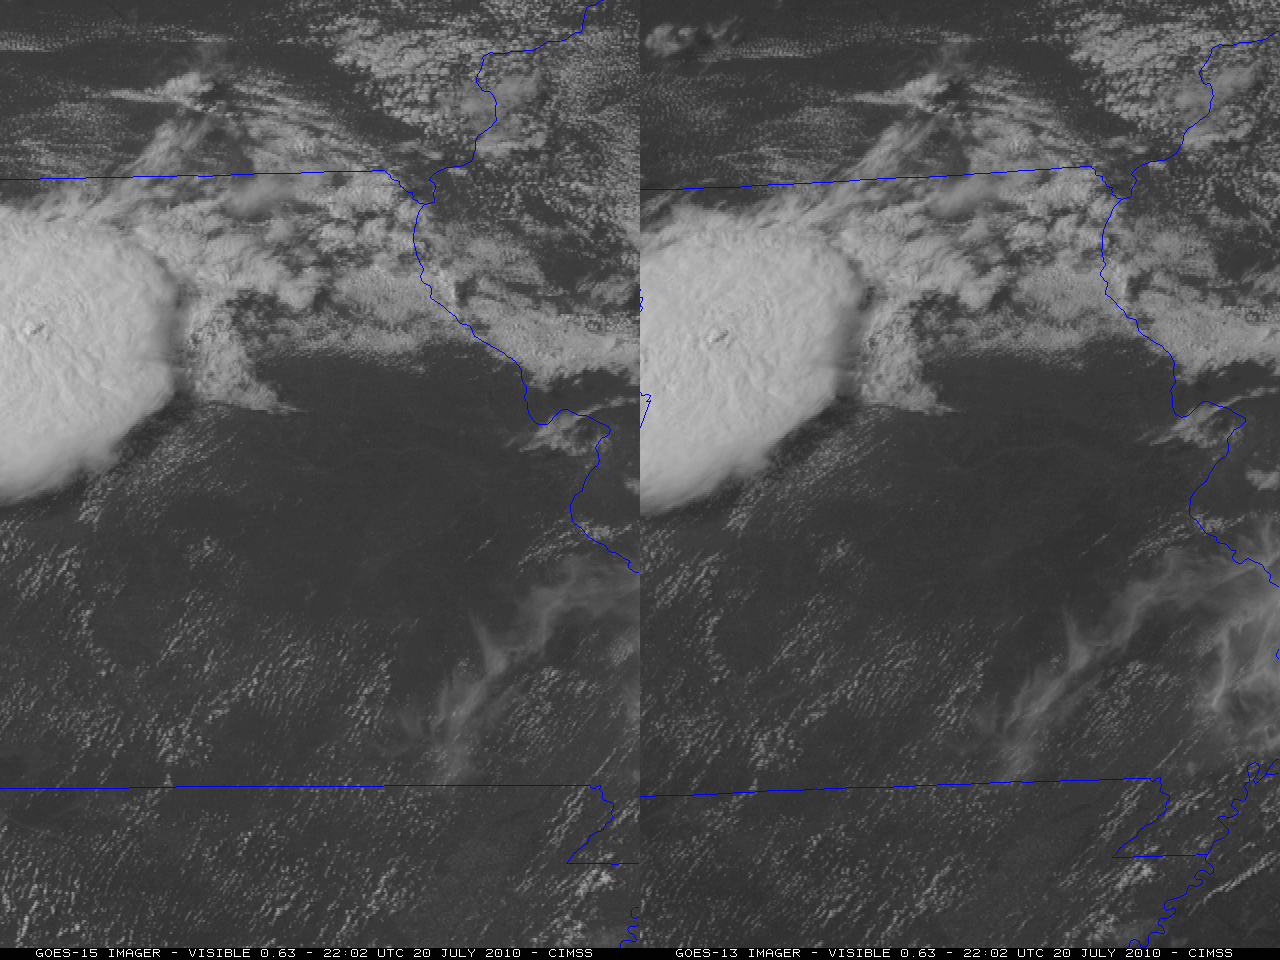 GOES-15 (left) and GOES-13 (right) visible channel images (with aircraft position times)